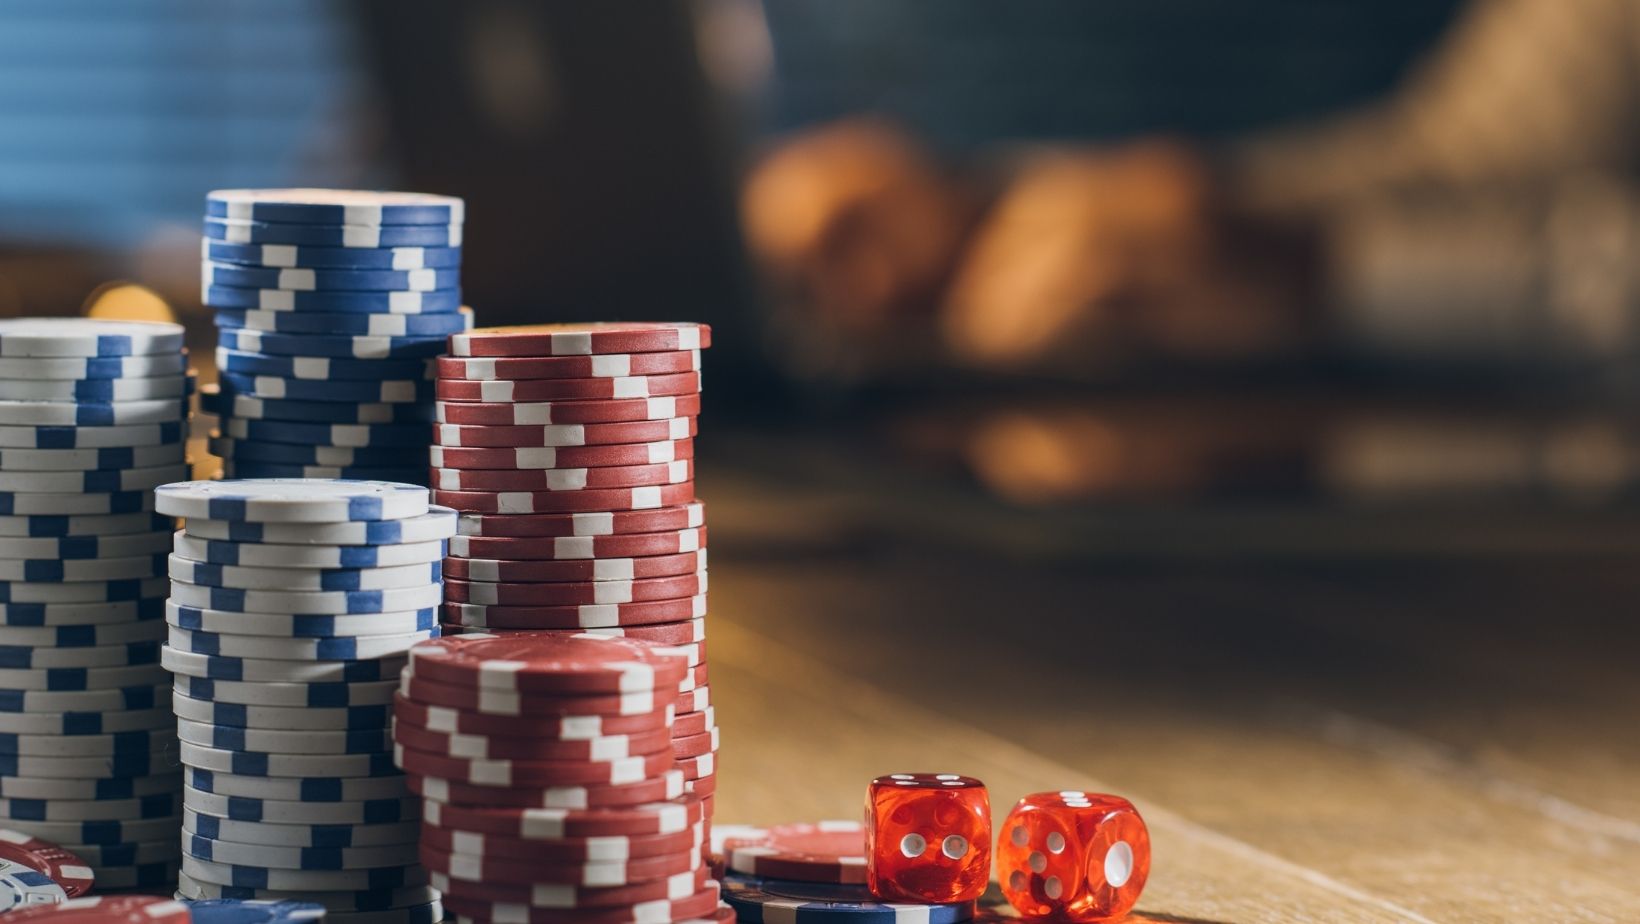 New To Online Casinos? Here Are The Games Newbies Should Try